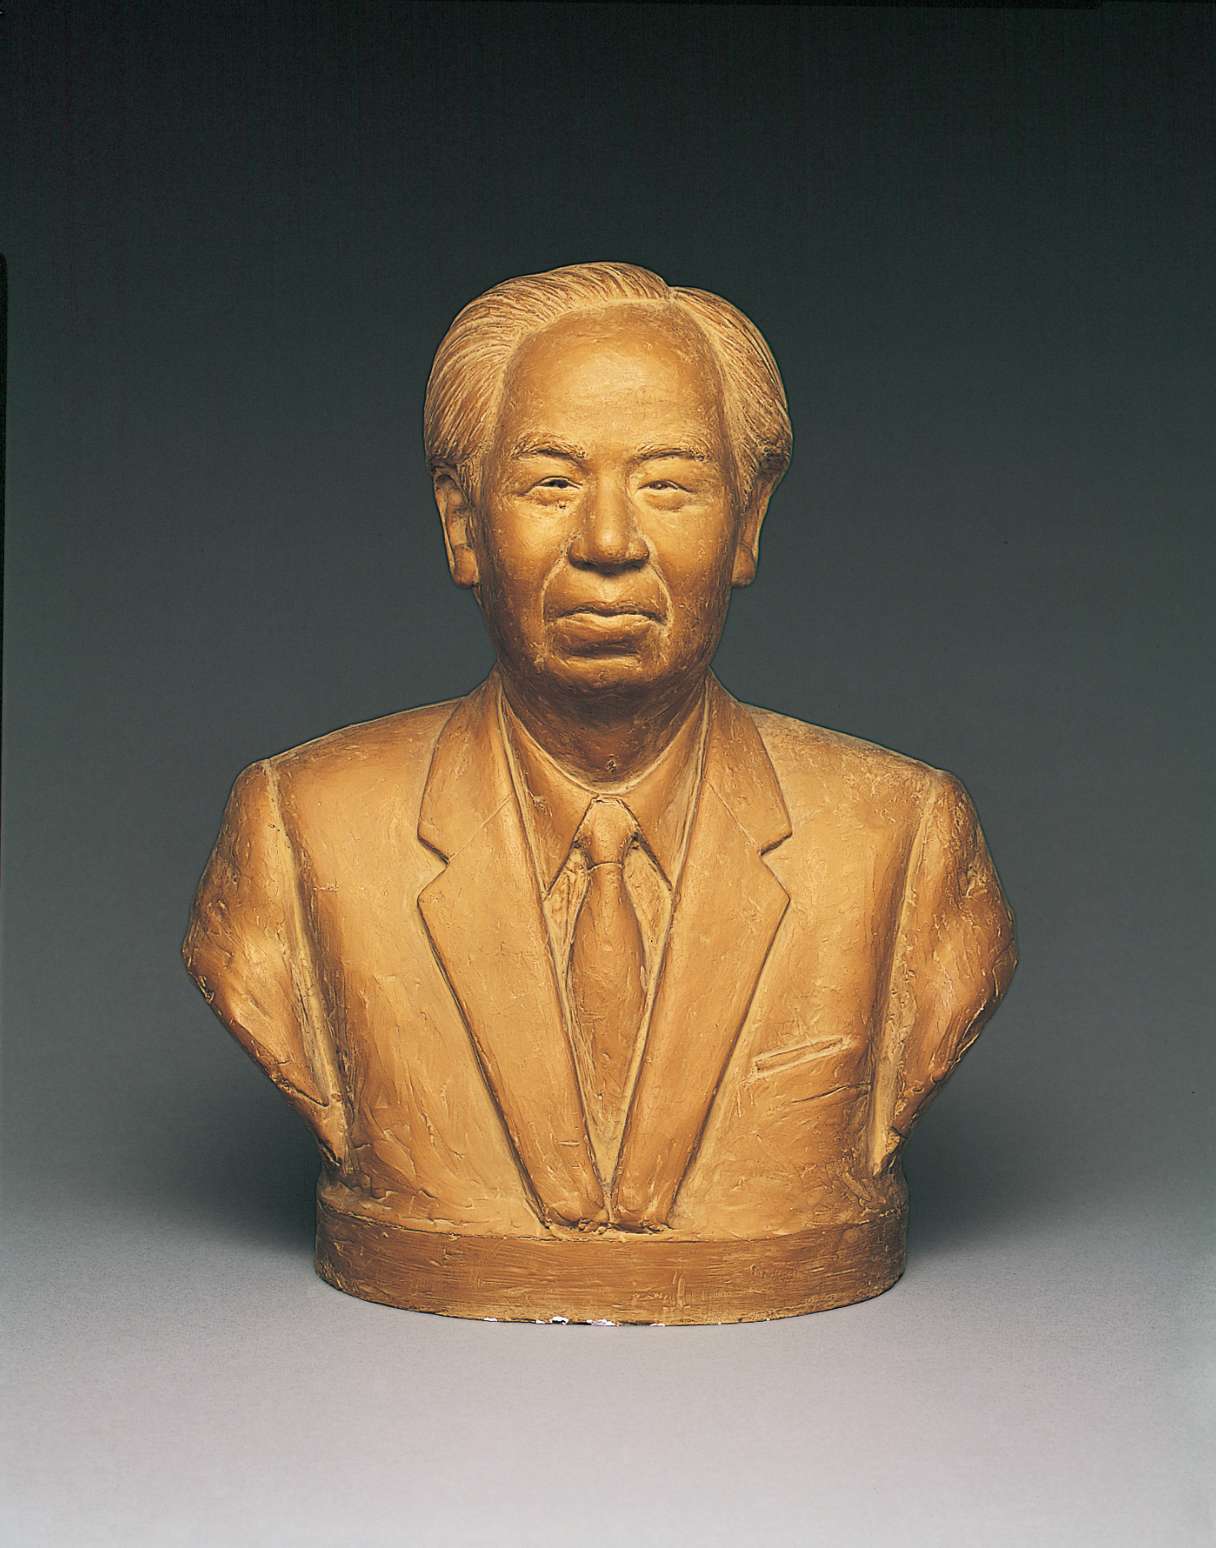 An ochre hued bust of a Japanese man wearing a suit and tie, with medium length hair parted to the left above a receding hairline and a friendly face with smiling eyes and a slight smile on the lips.